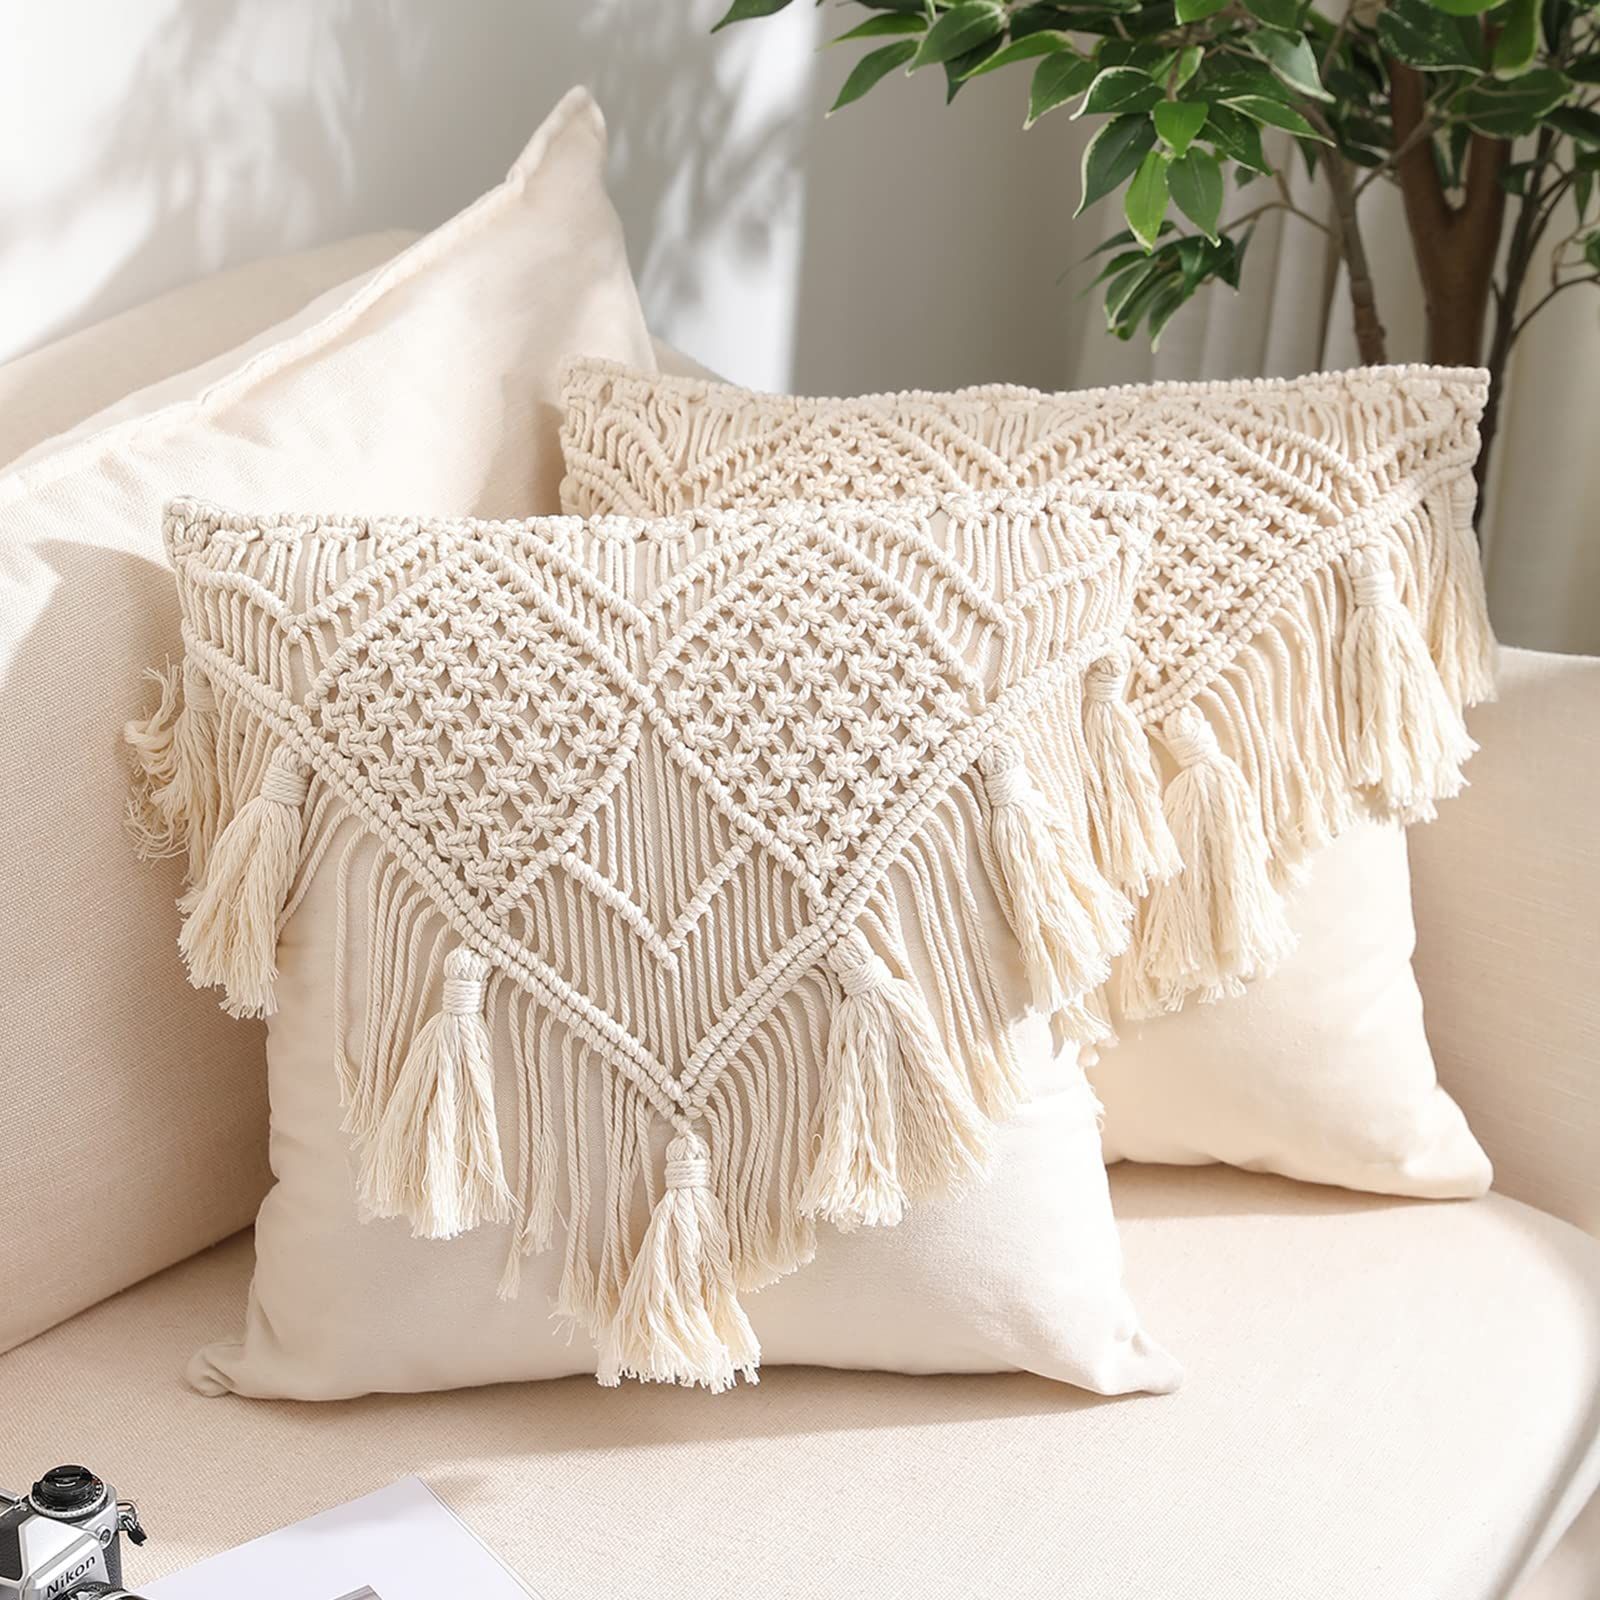 Cozy Comfort: Relax in Style with Cotton Pillows